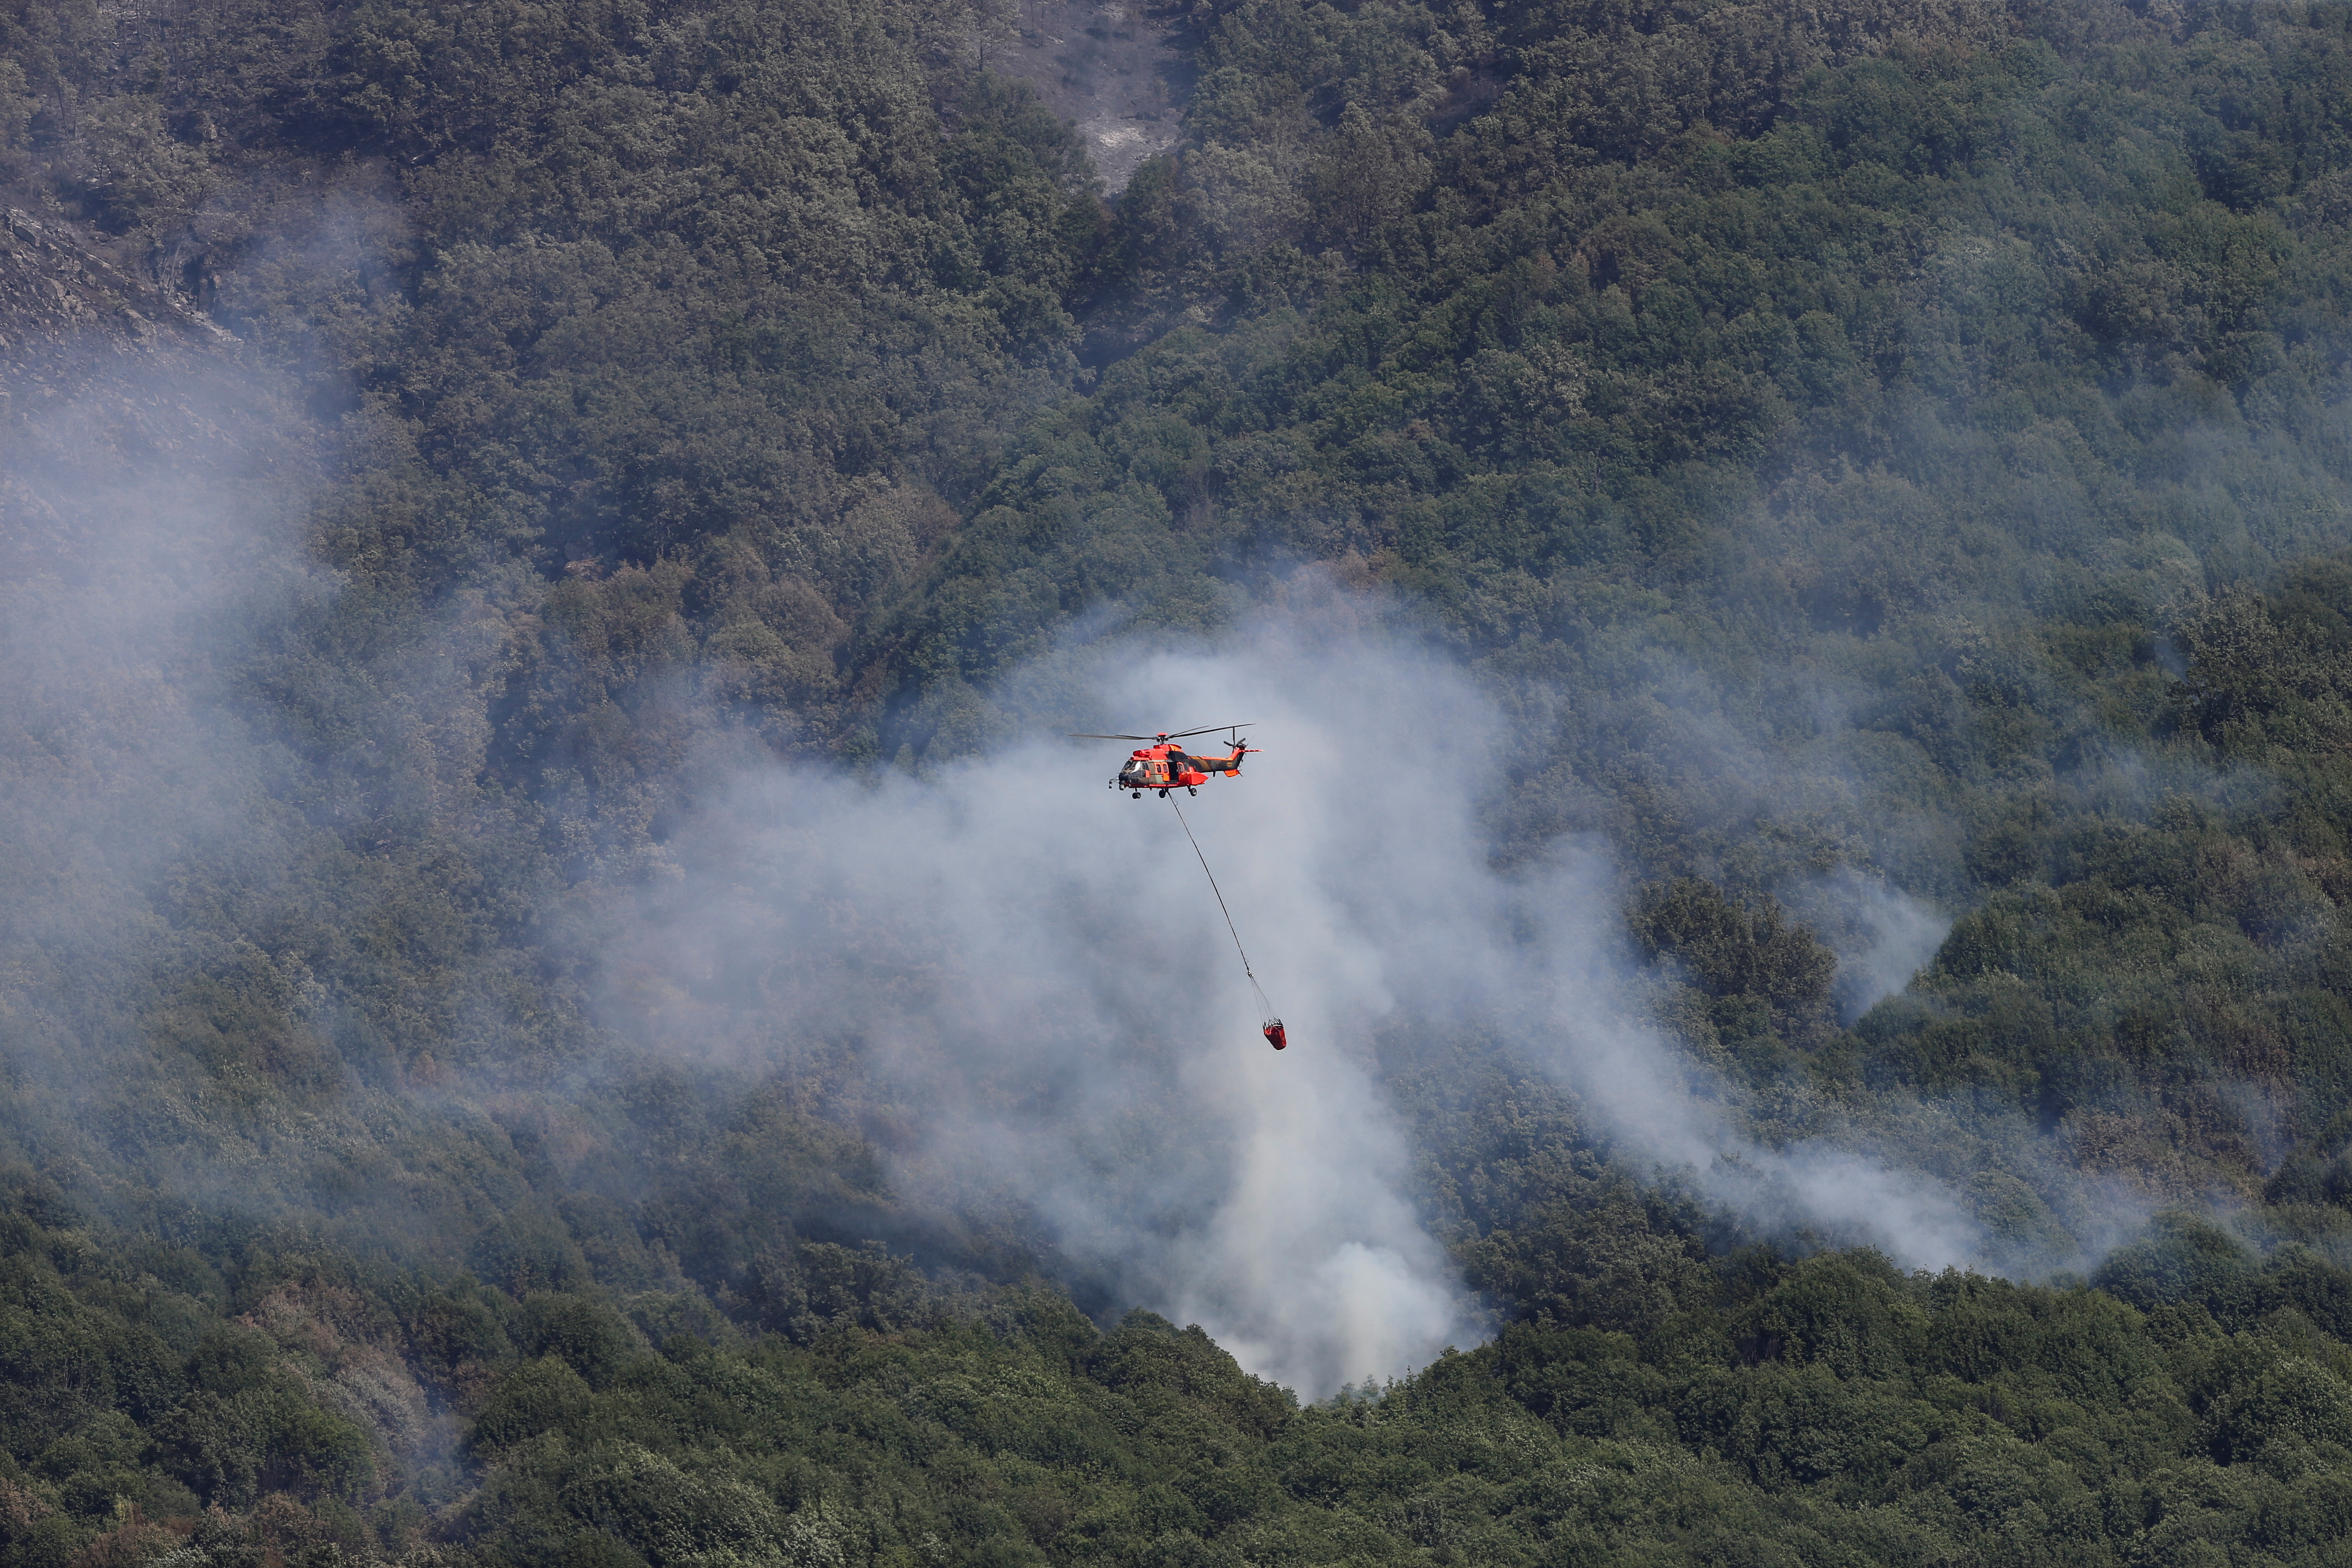 Wildfire rages as Spain experiences its second heatwave of the year